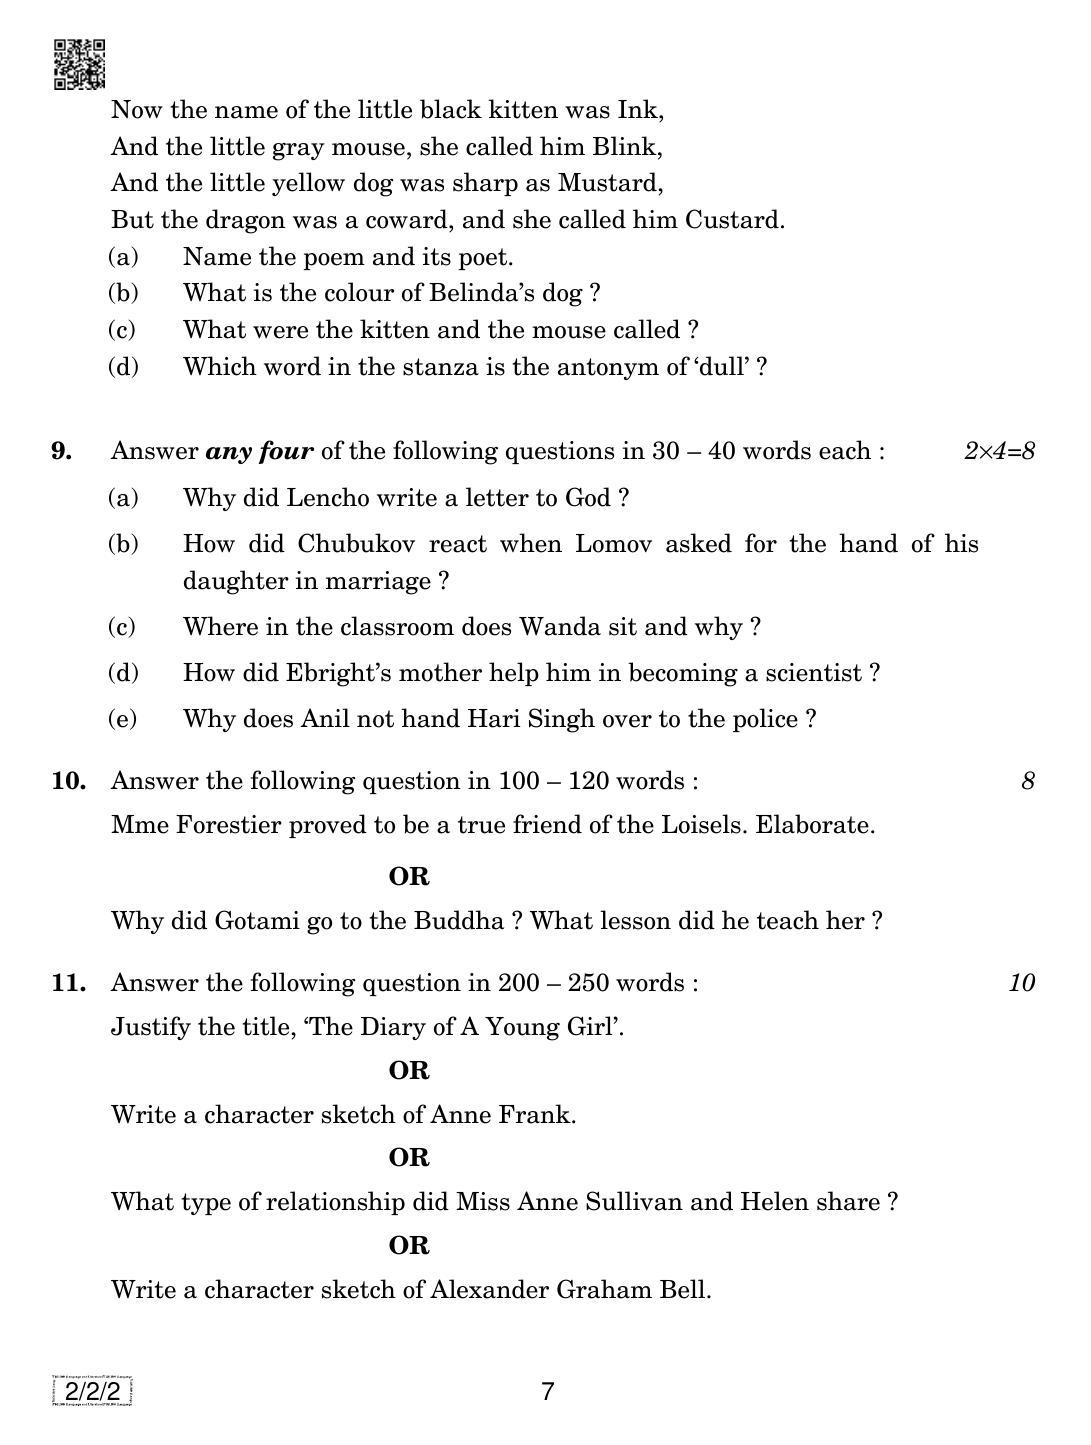 CBSE Class 10 2-2-2  ENGLISH LANGUAGE AND LETERATURE 2019 Question Paper - Page 7